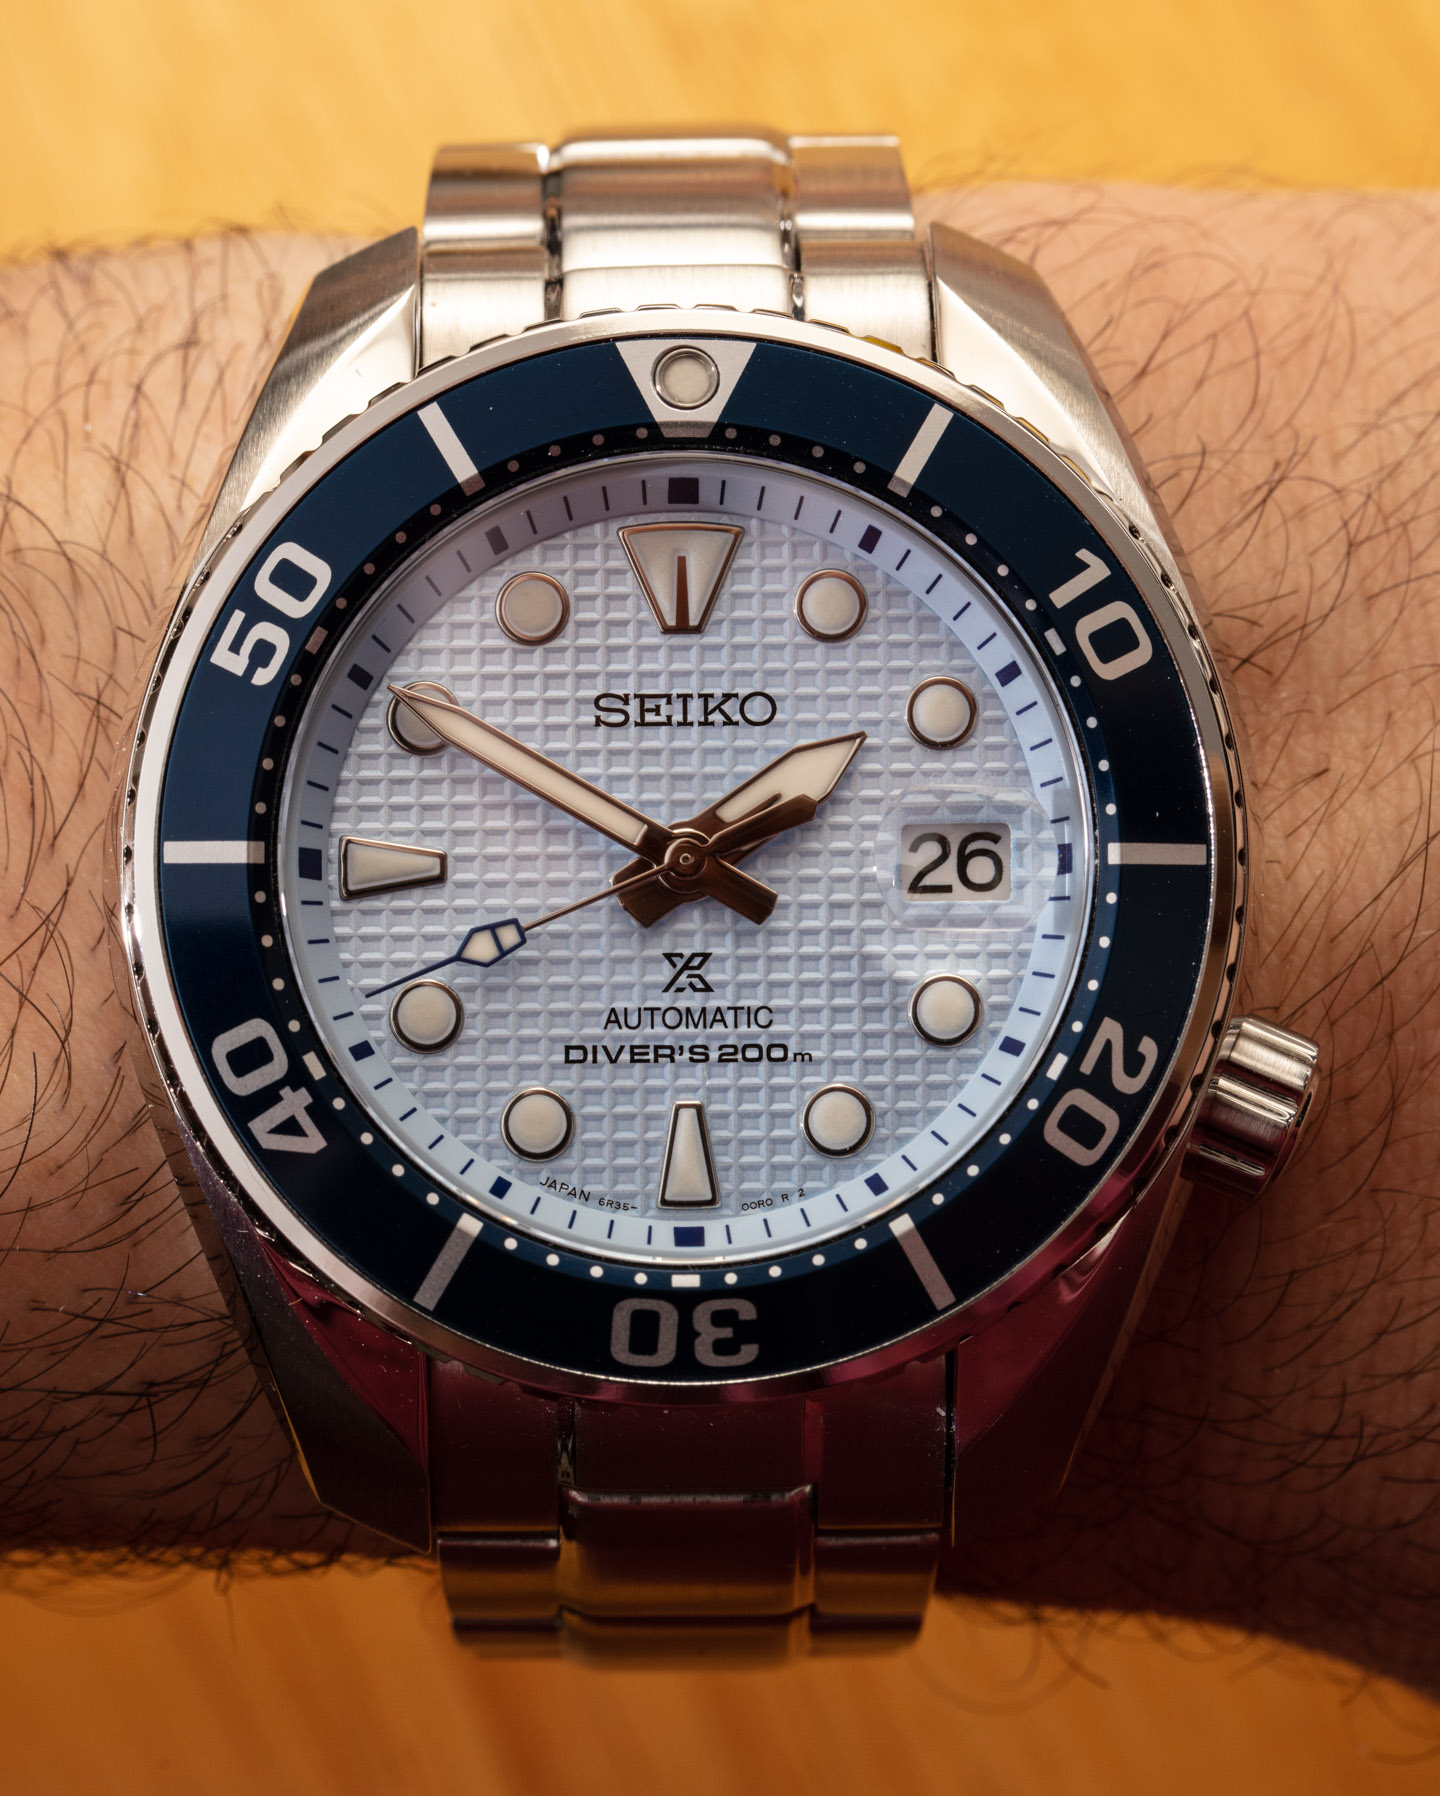 Hands-On: Seiko Prospex Built For The Ice Diver SPB175, SPB177, & SPB179  Watches | aBlogtoWatch